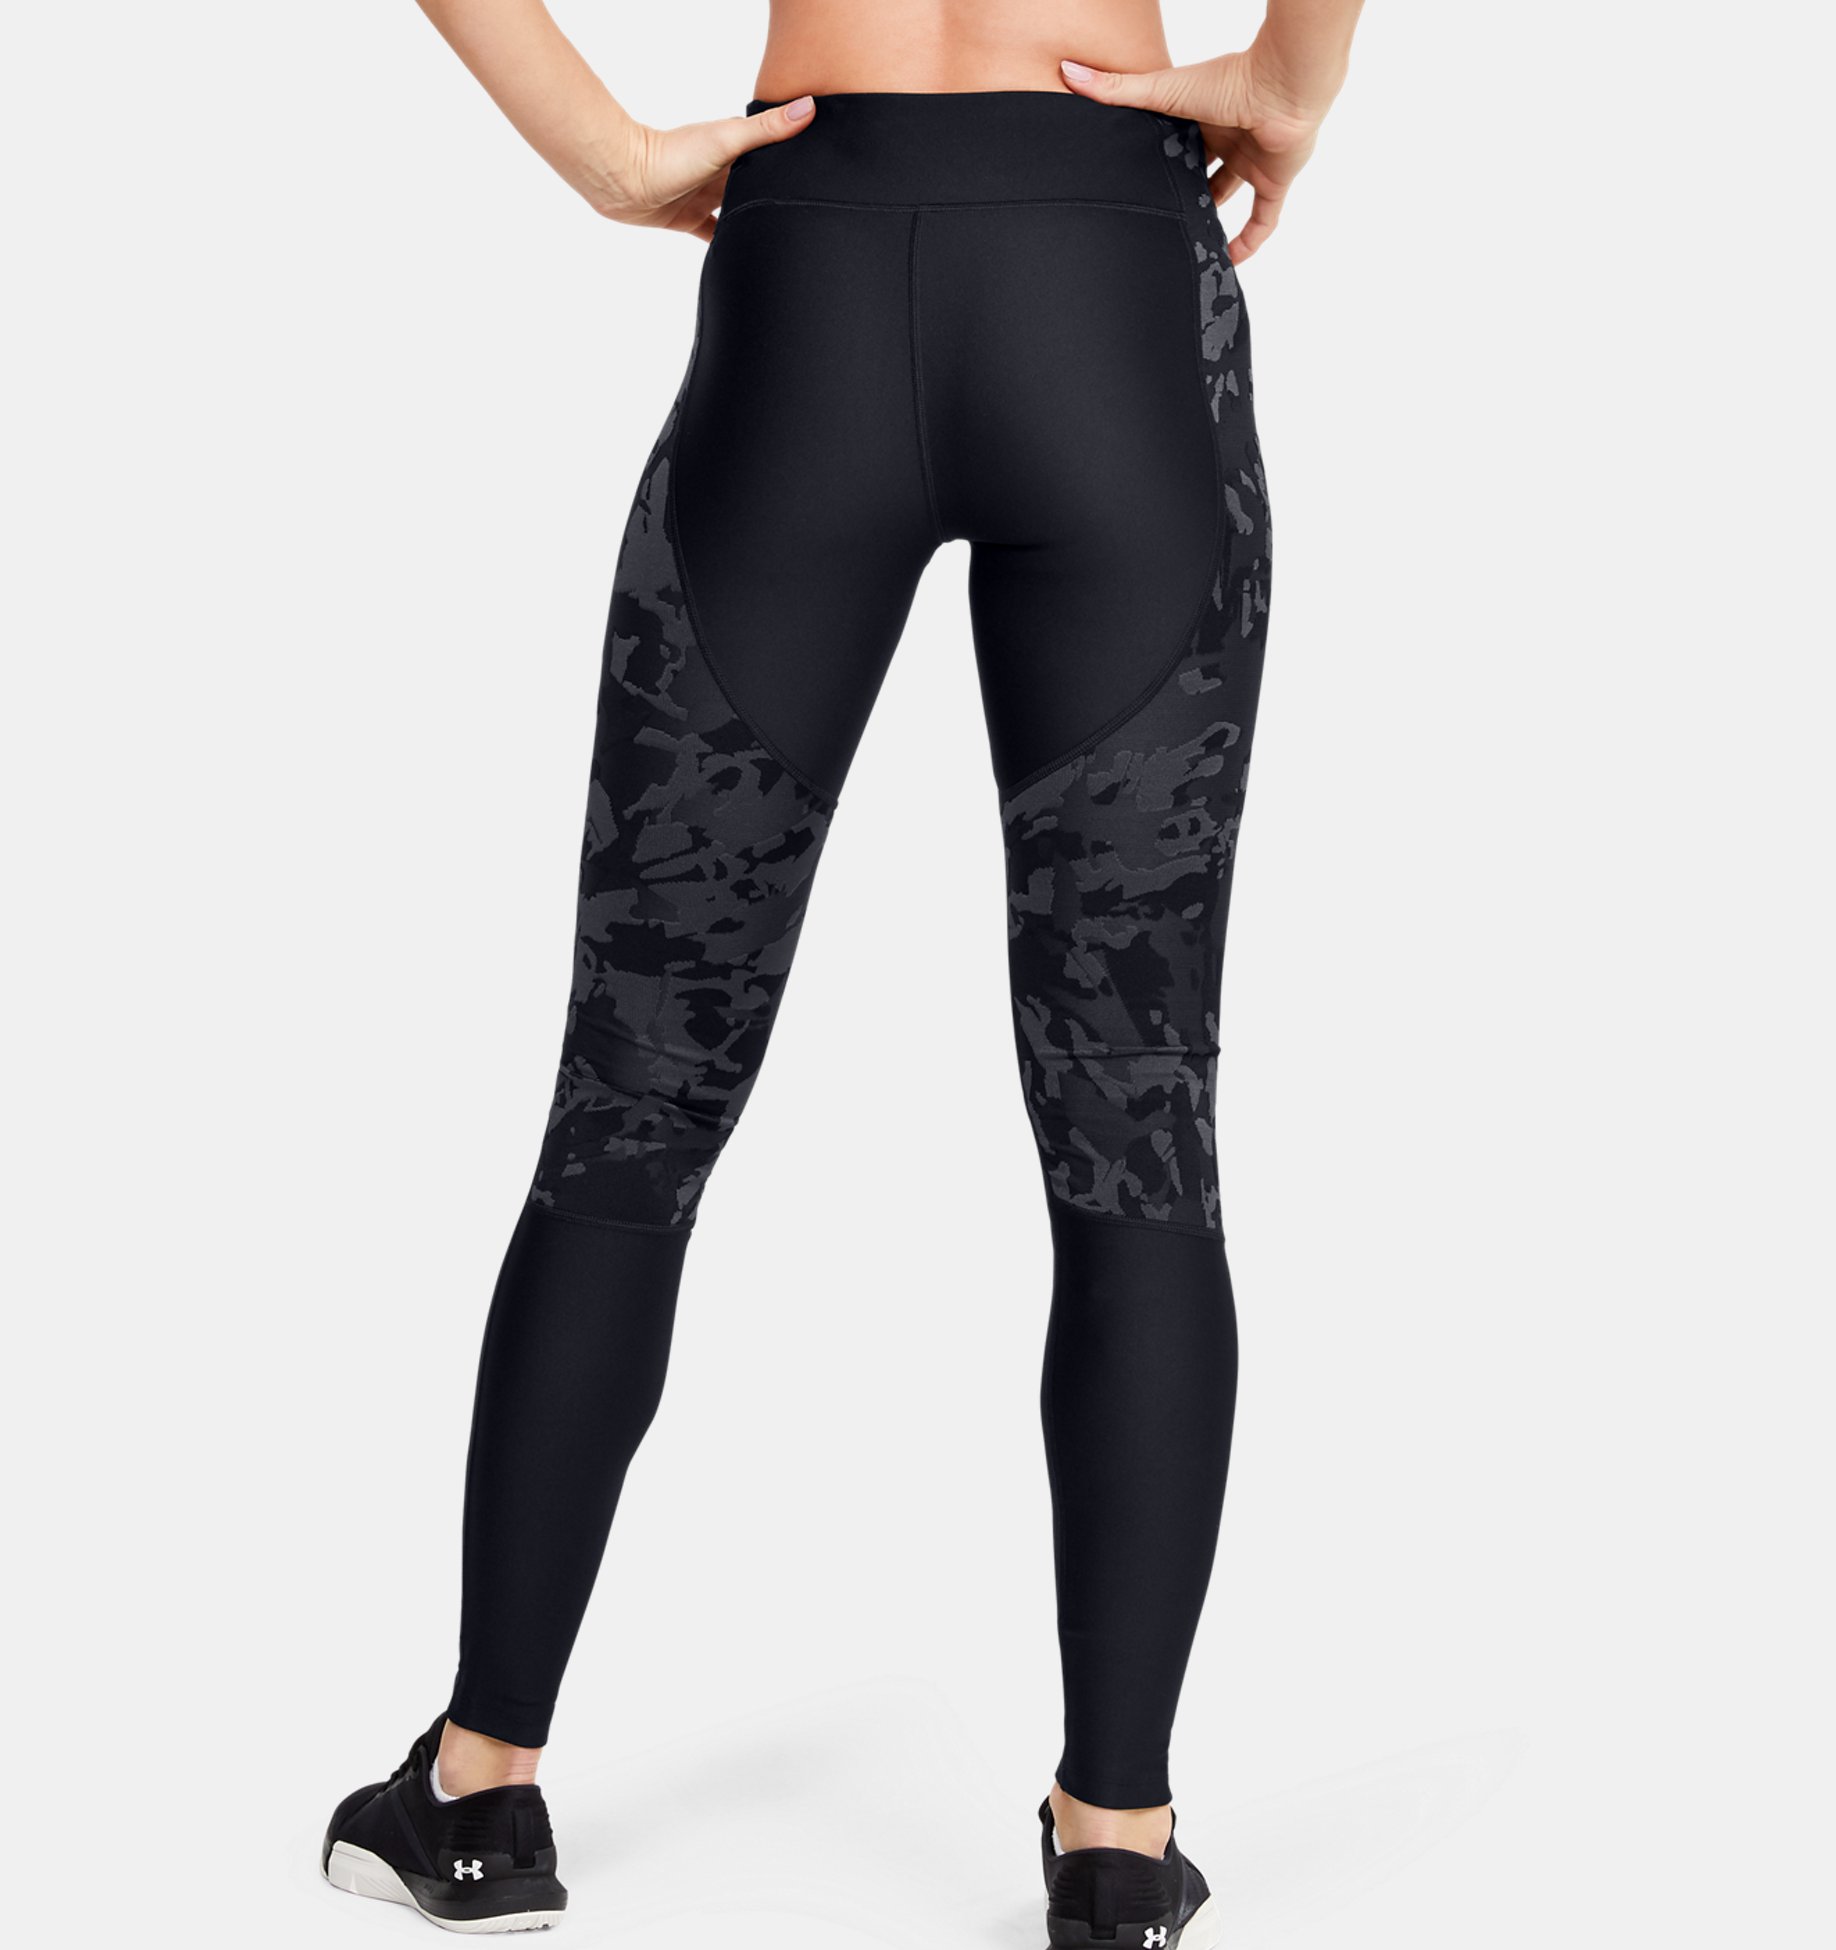 Under Armour HeatGear Perf Inset Graphic Womens Long Training Tights Black 